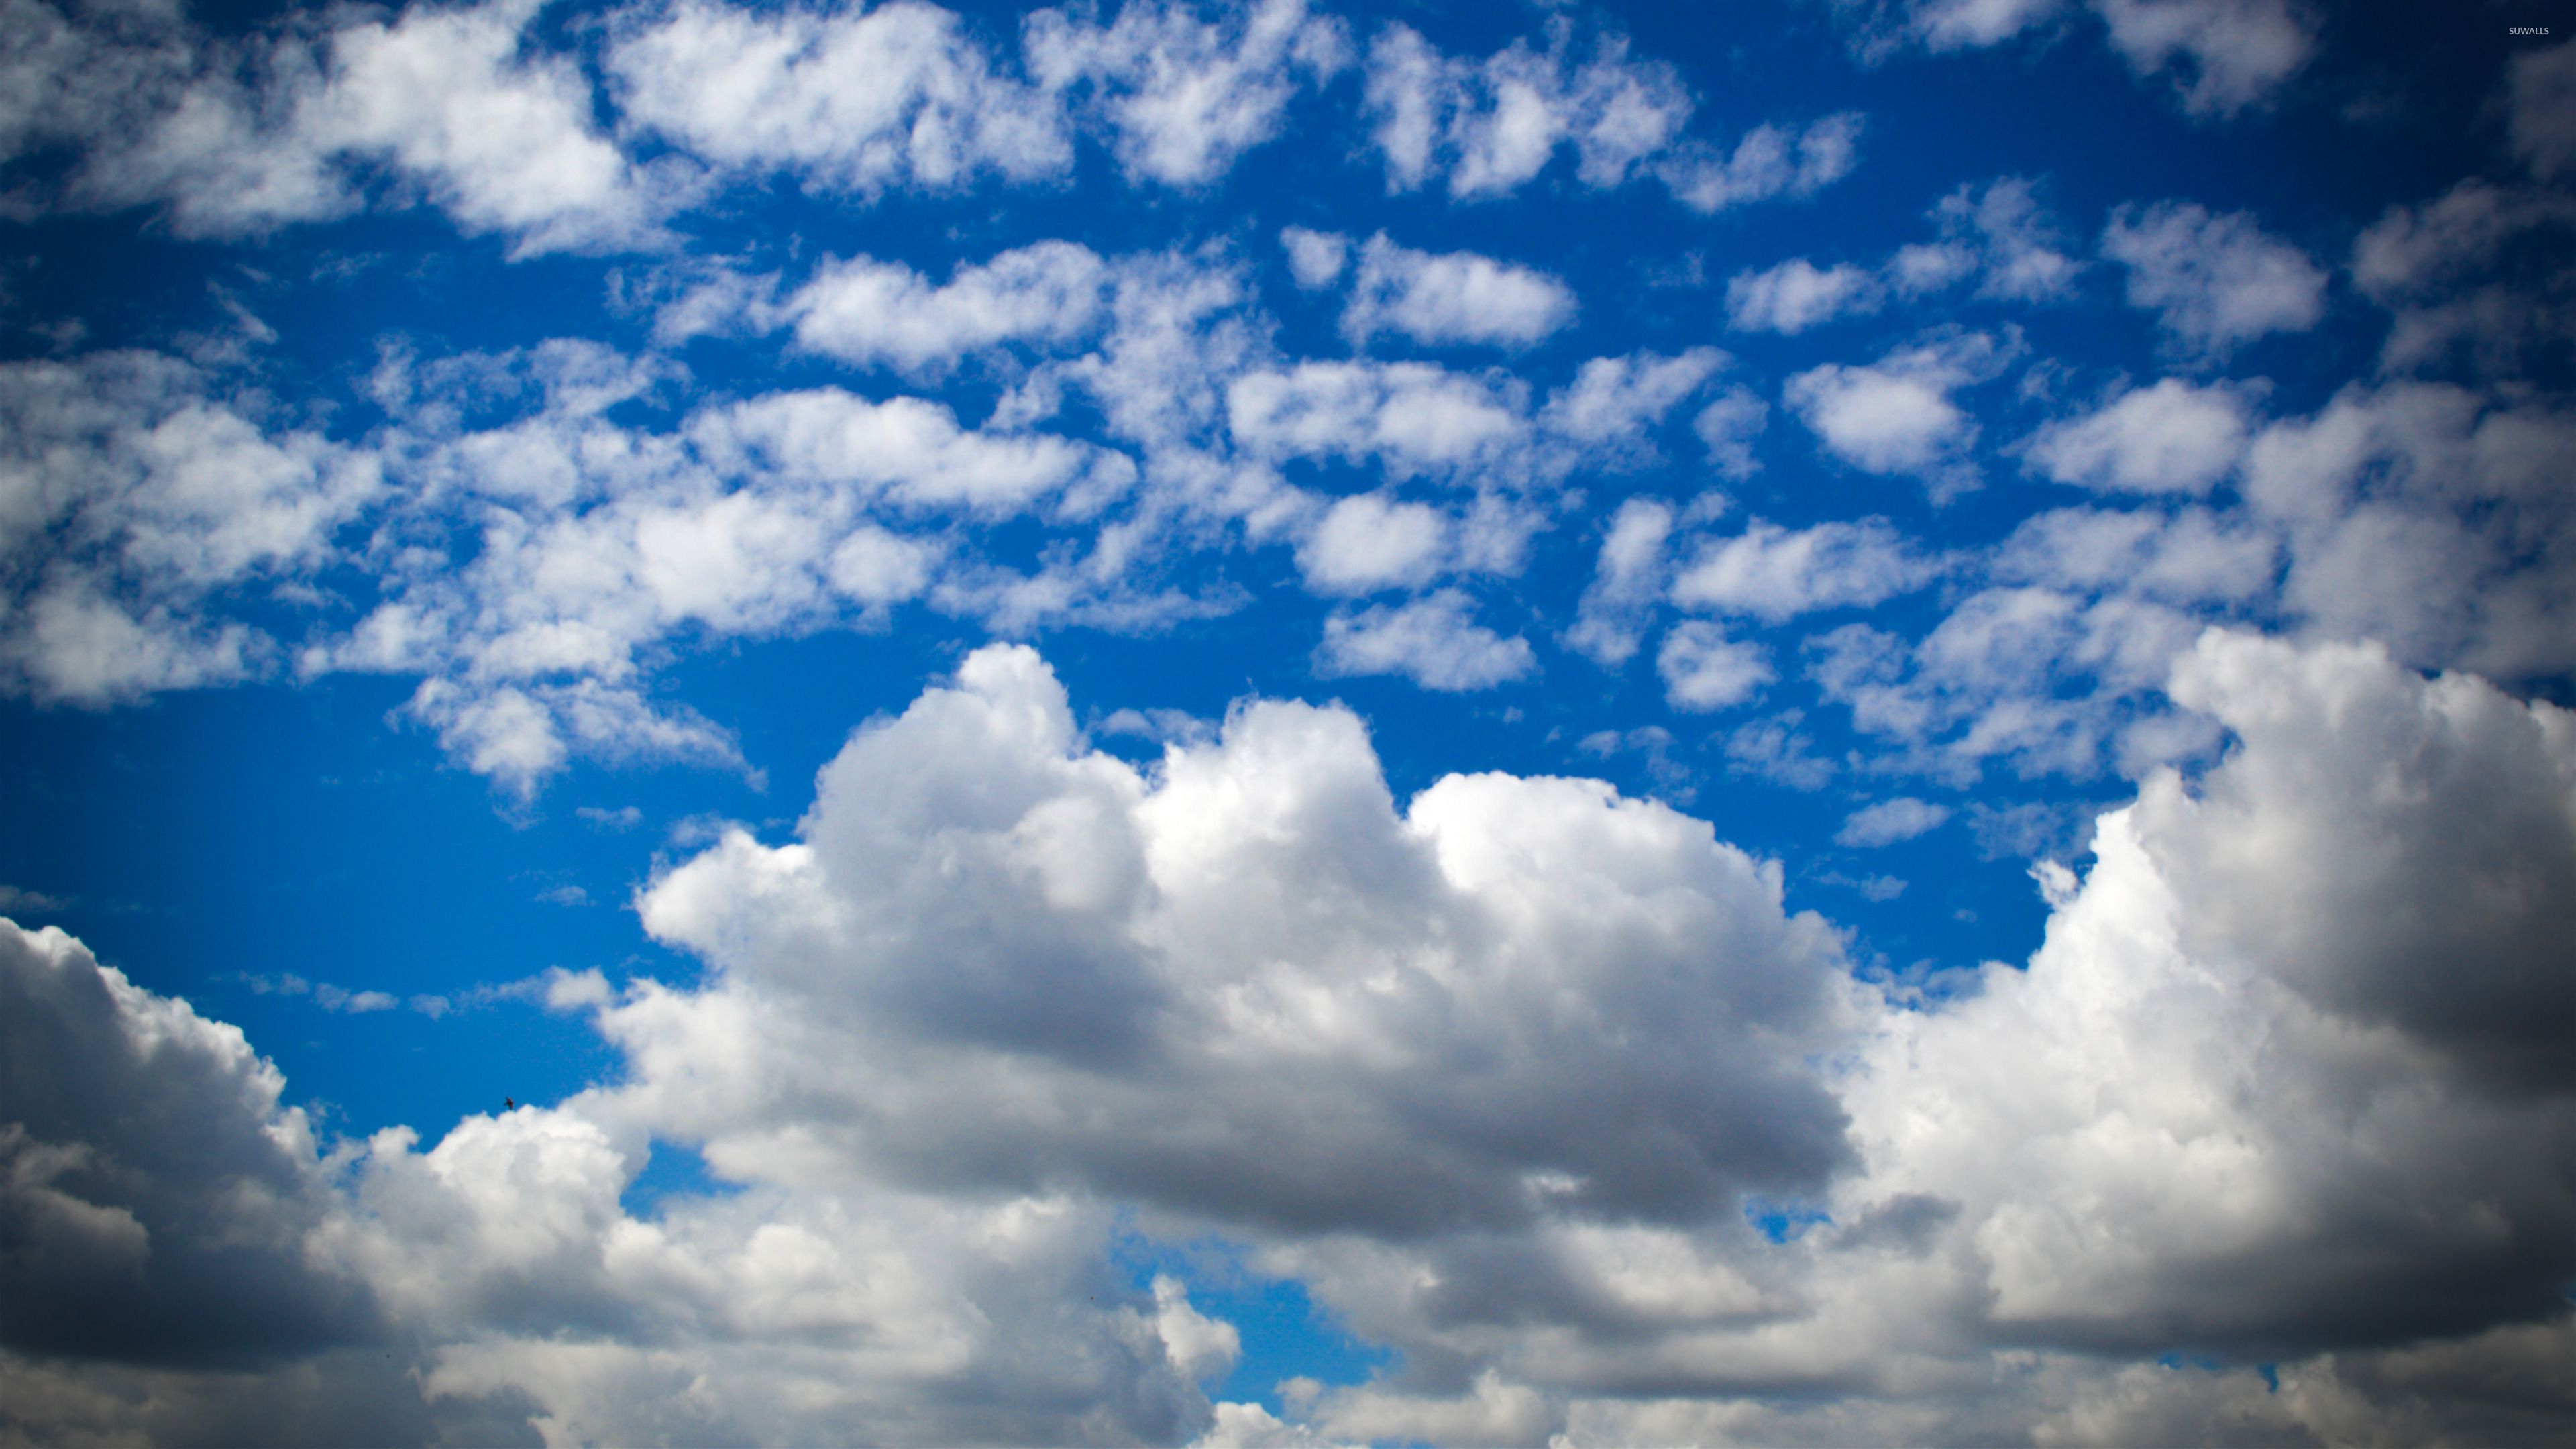 Blue Sky With Fluffy Clouds Wallpaper